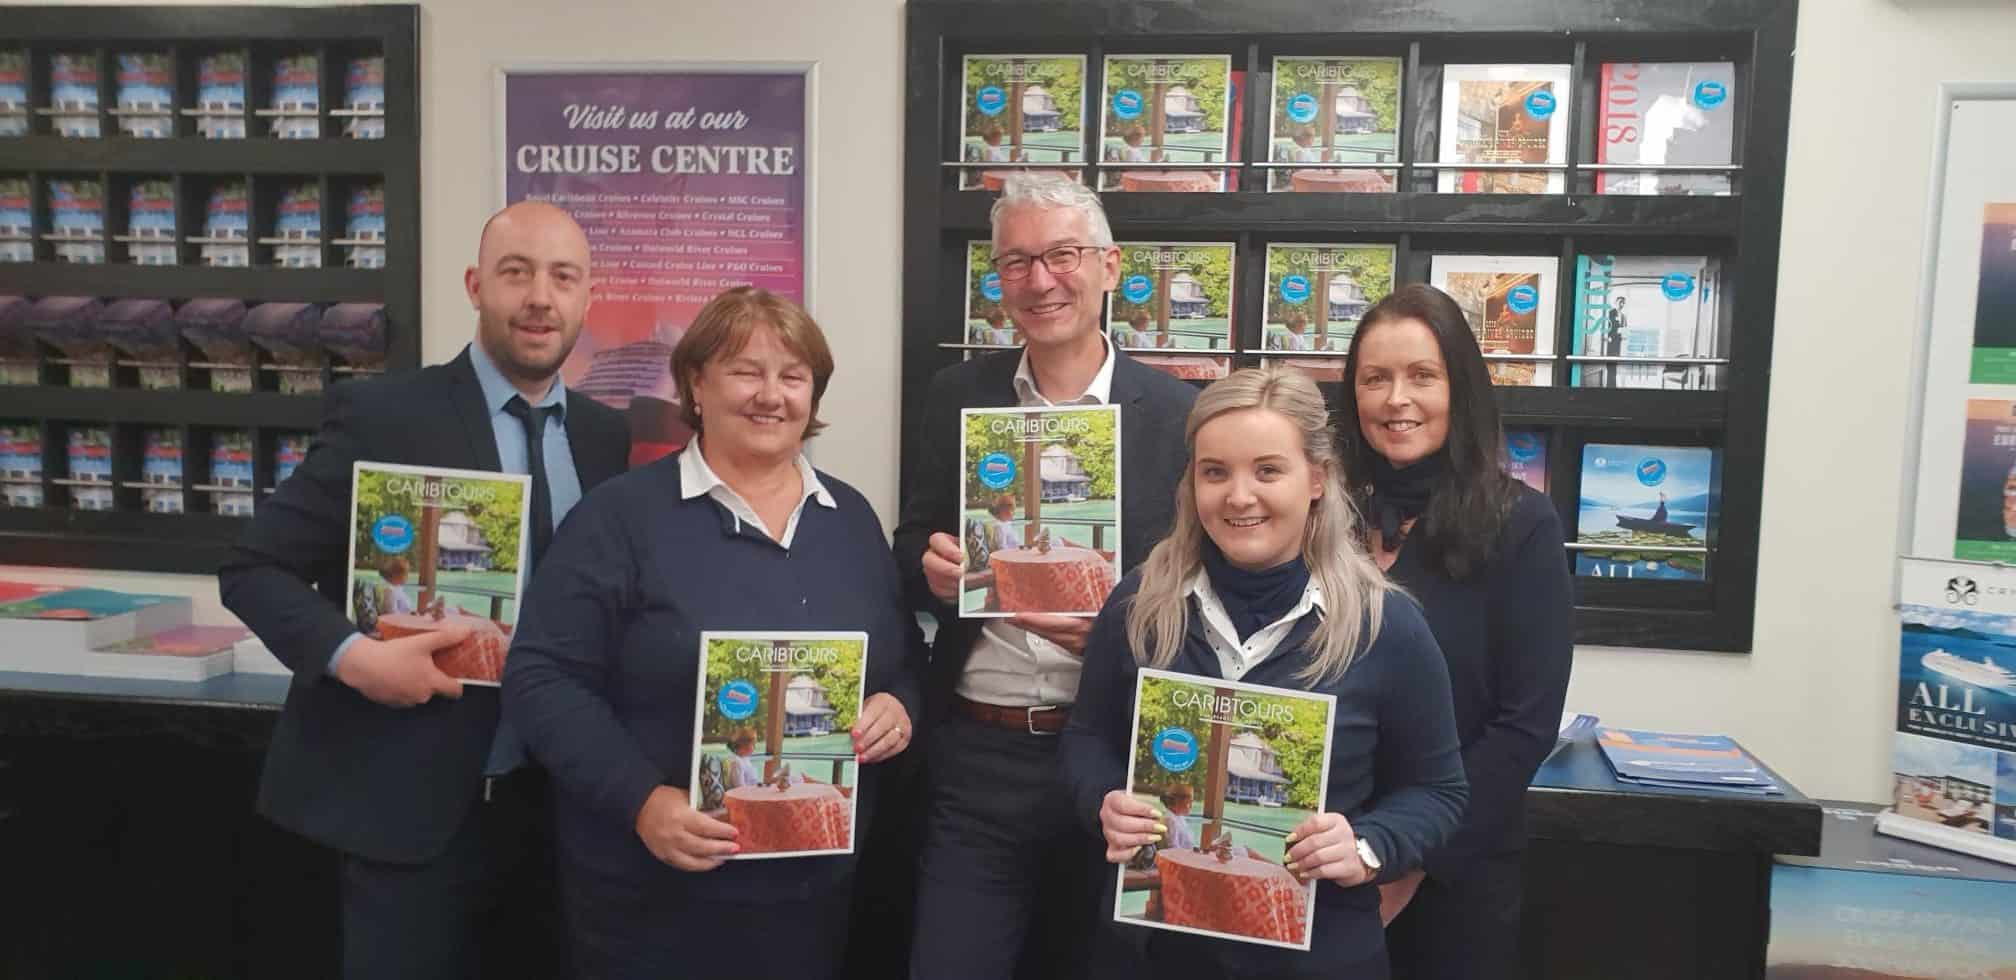 Promoting Caribtours with Strand Travel Waterford